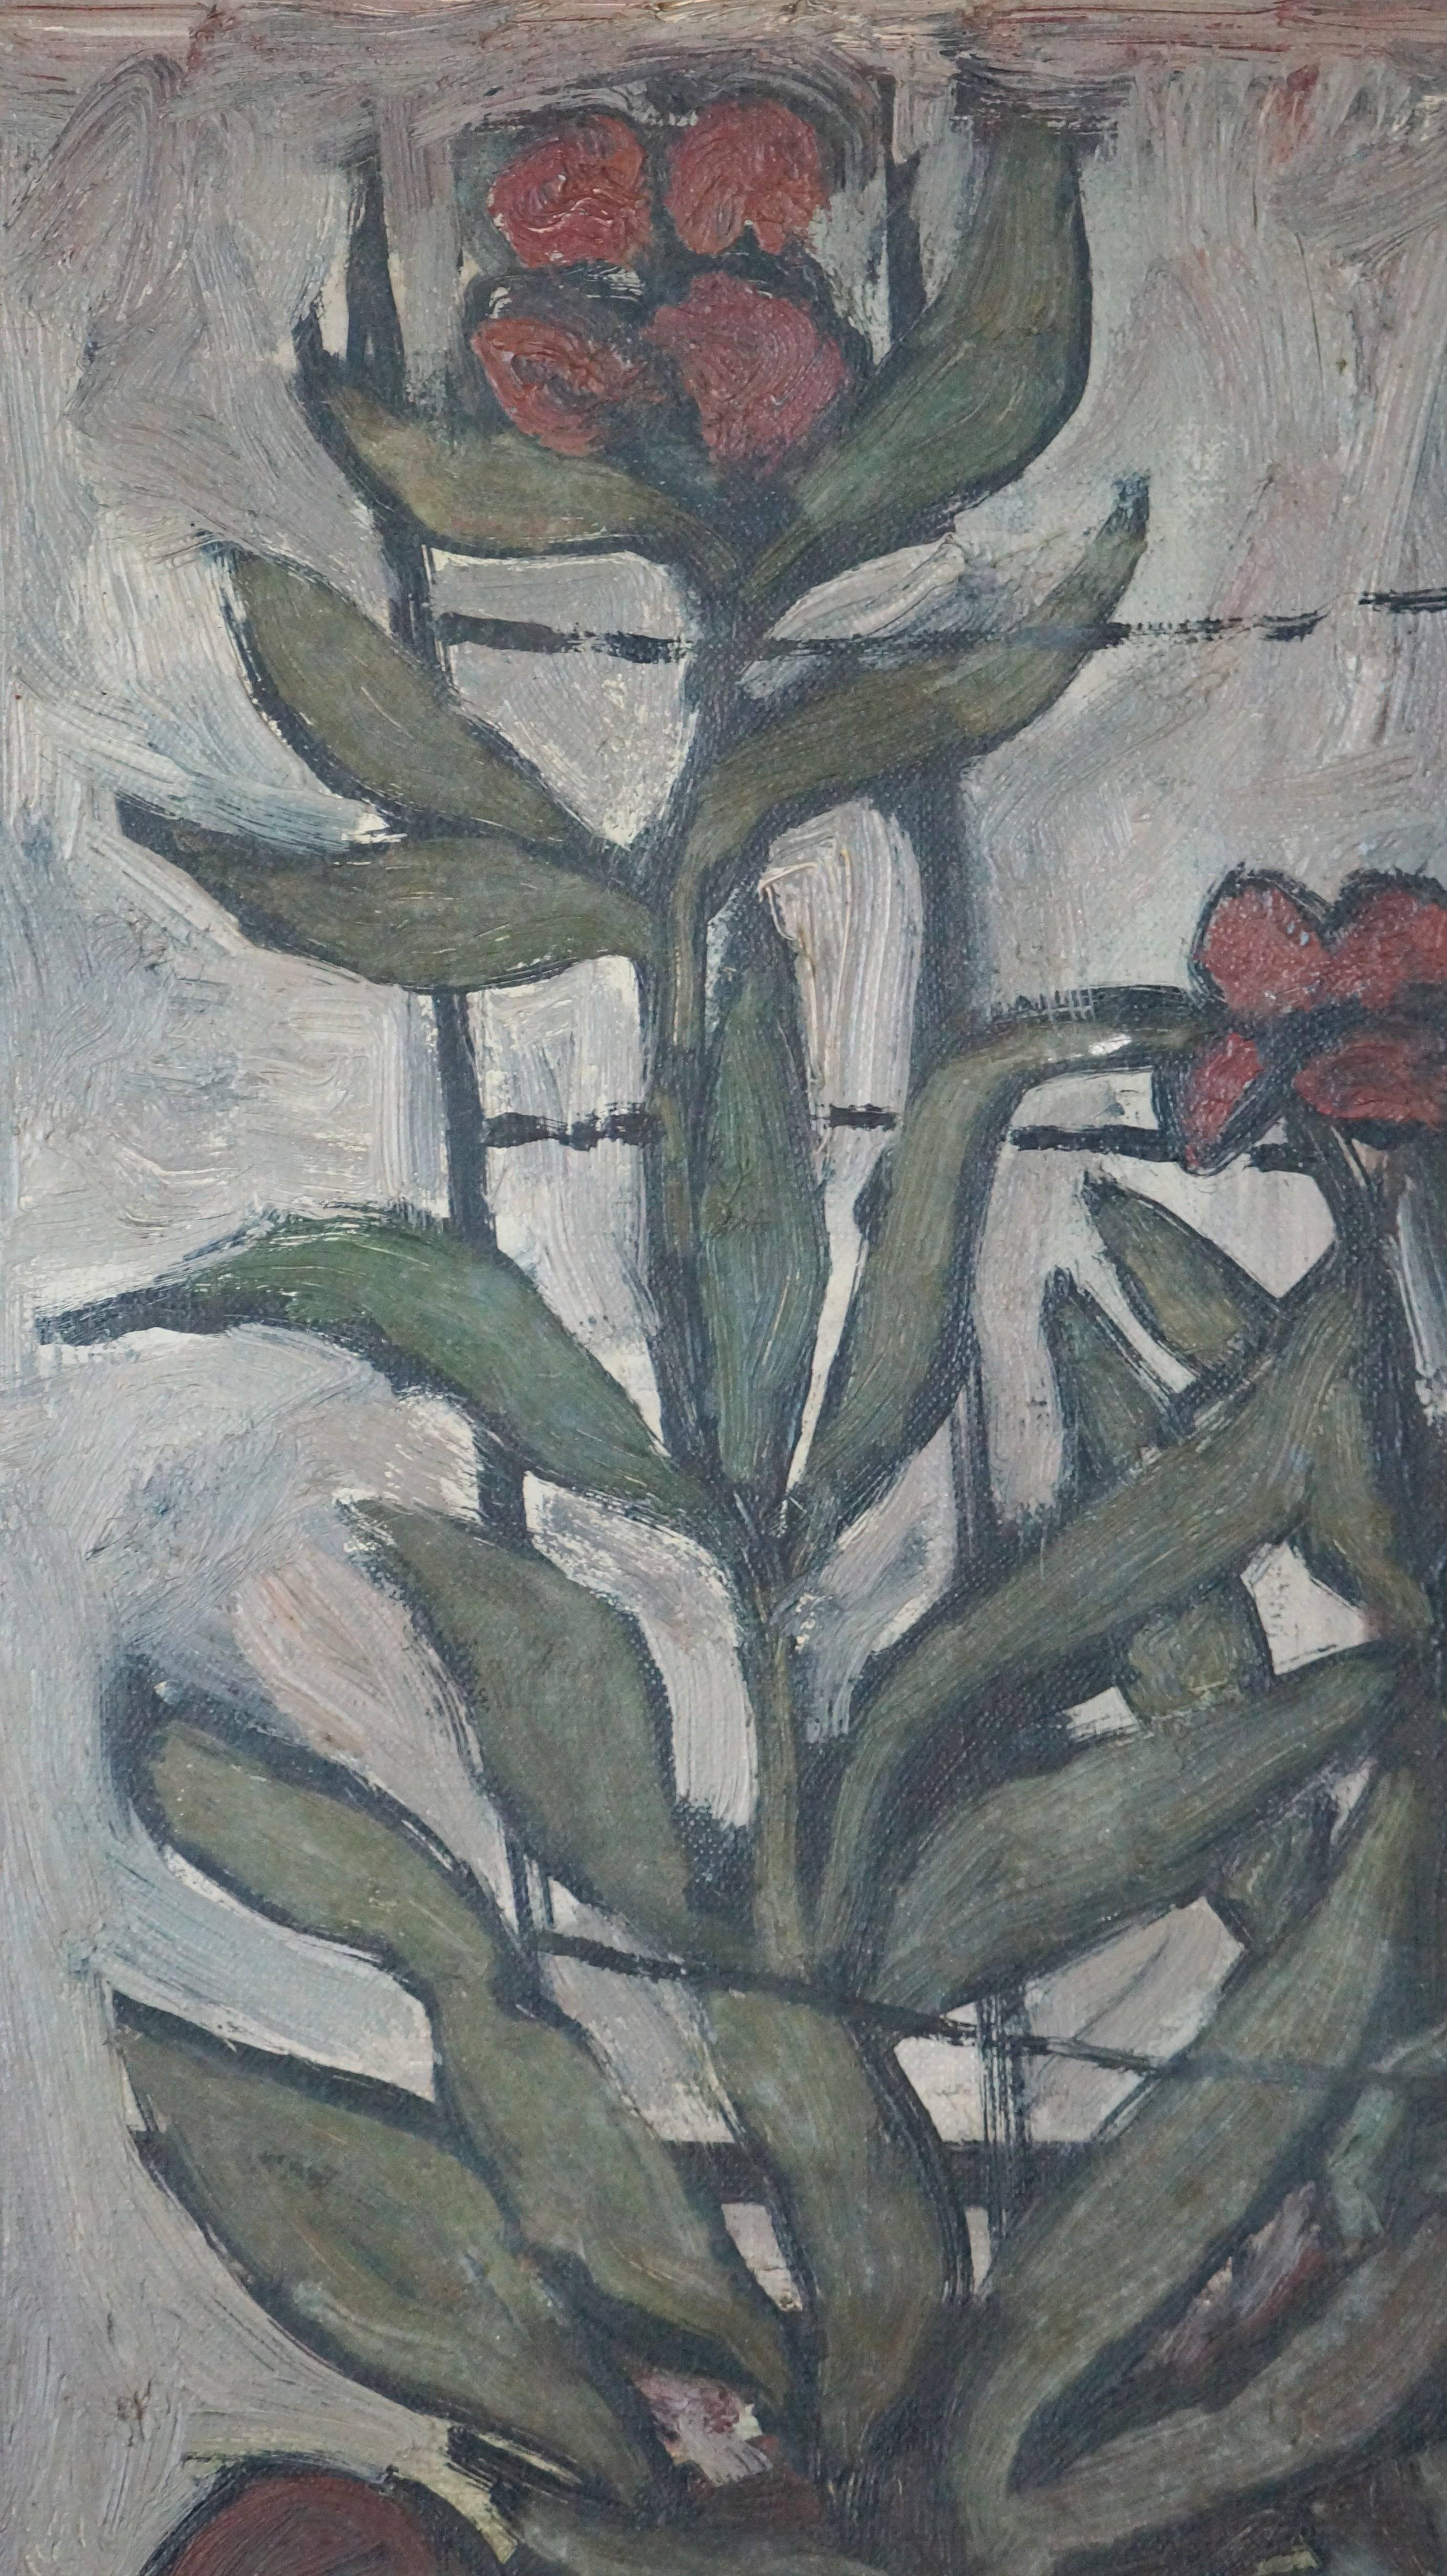 Le Bouquet, 1968  - Oil paint, 83x103 cm, framed - Gray Still-Life Painting by Will H.Torehuysen